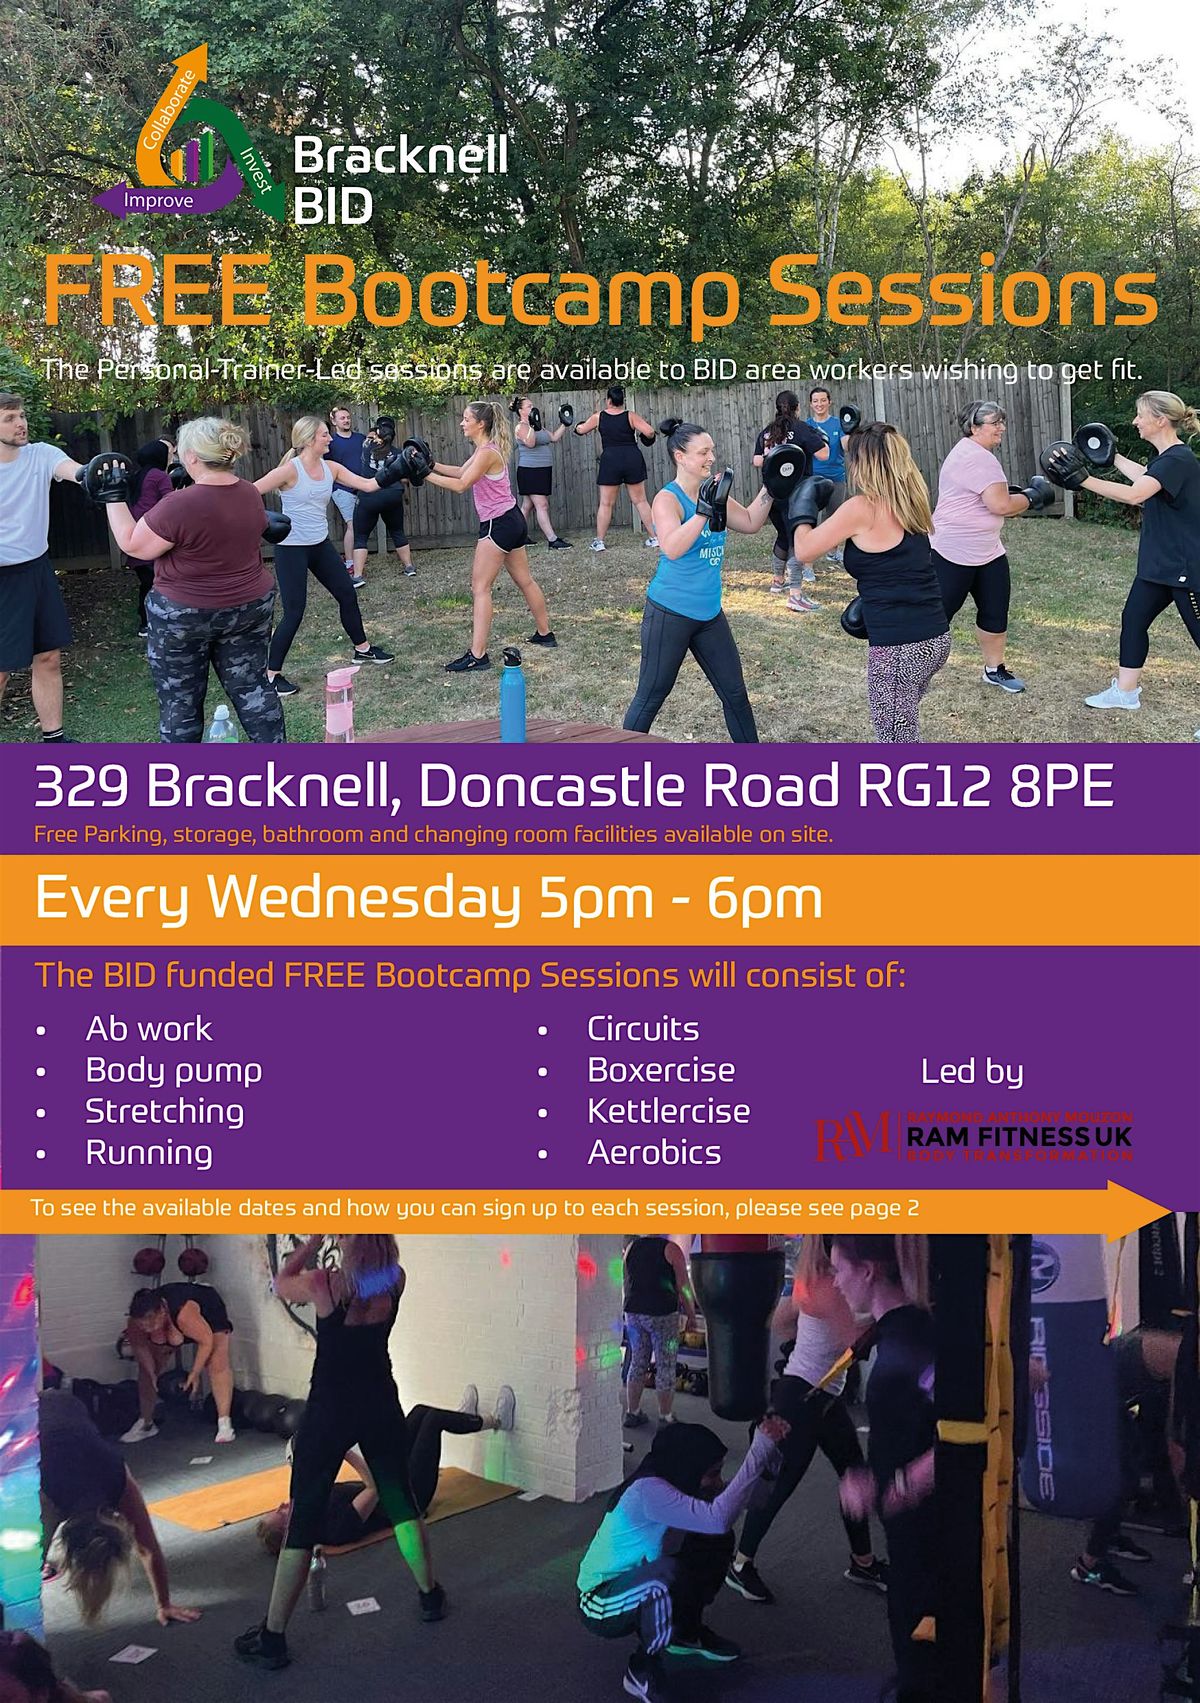 FREE Bootcamp Sessions | Personal-Trainer-led | Week 99